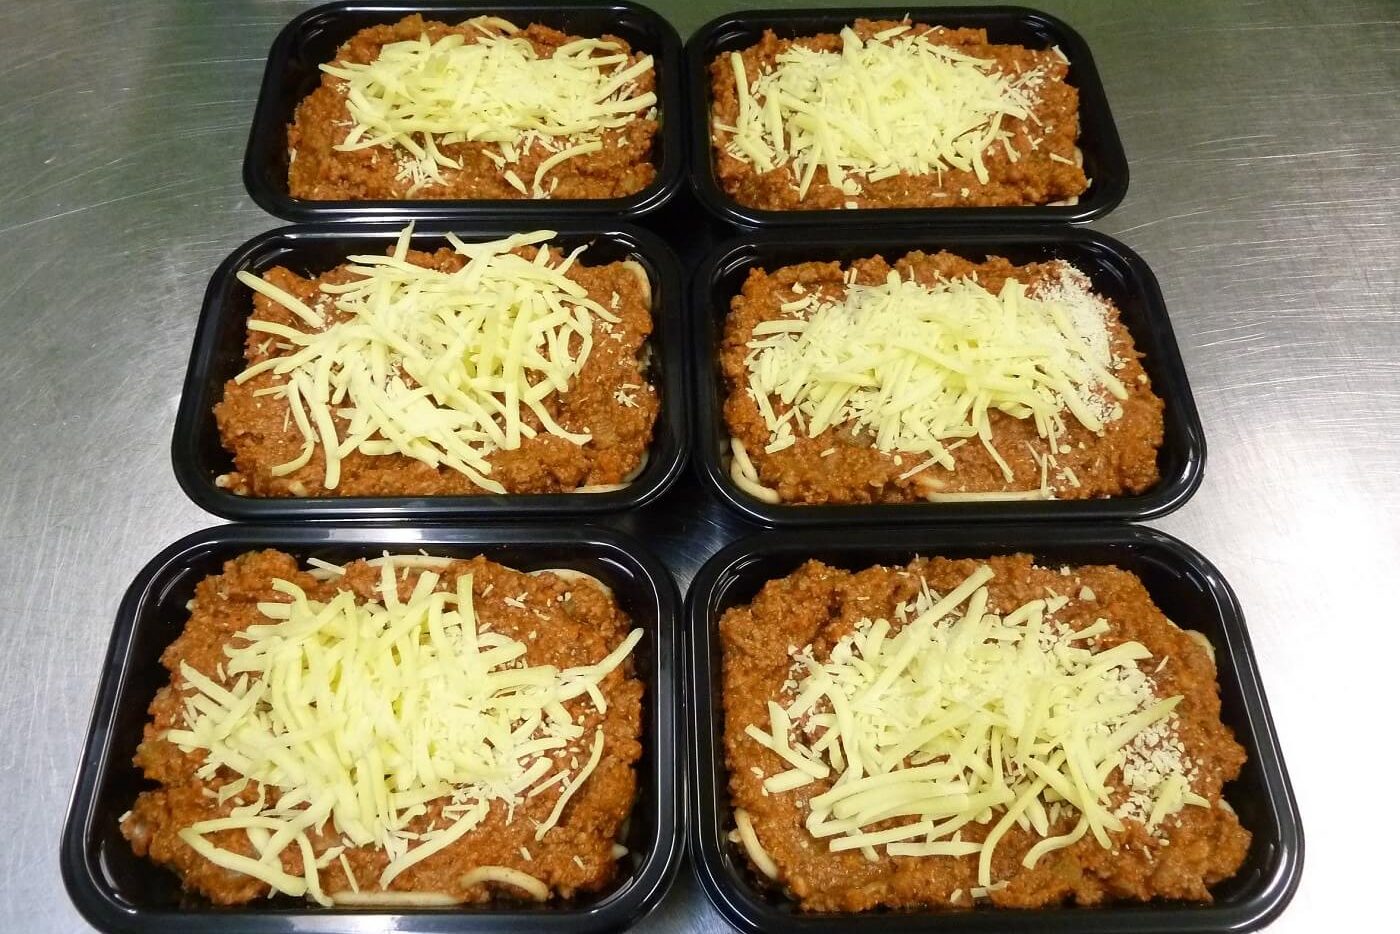 Six Pasta Bolognaise ready-meals in packaging trays